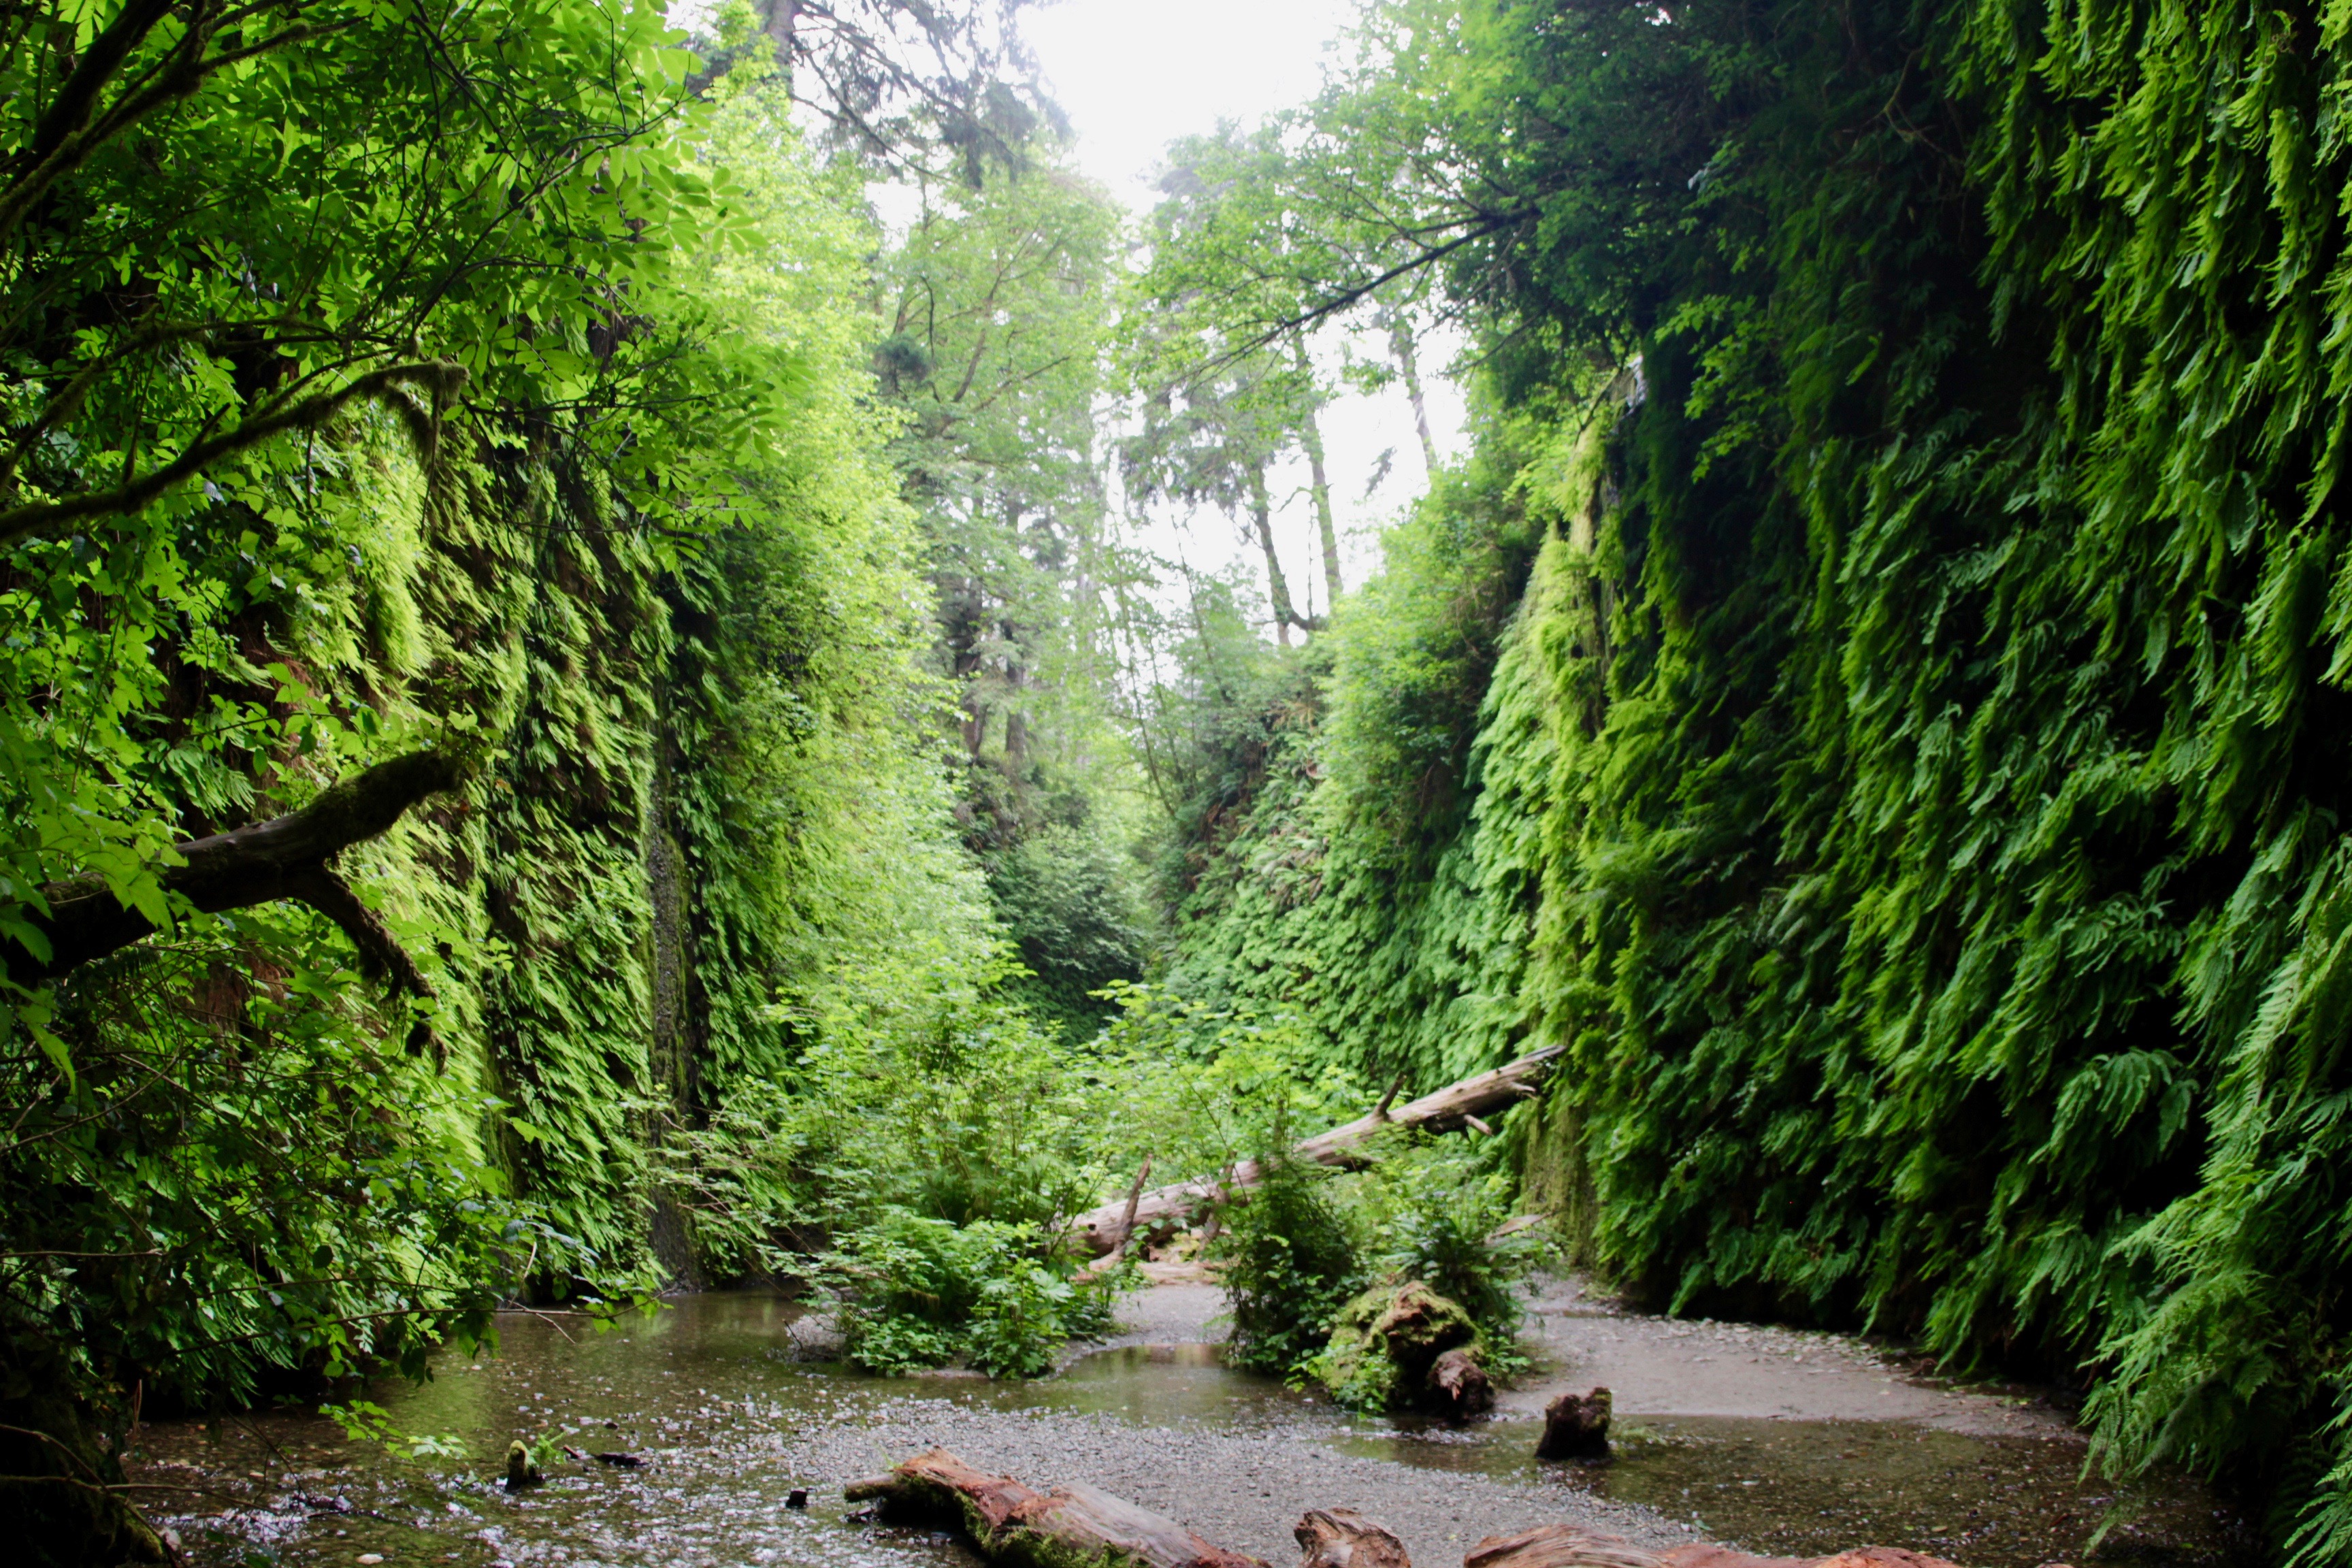 Verdant canyon covered in ferns